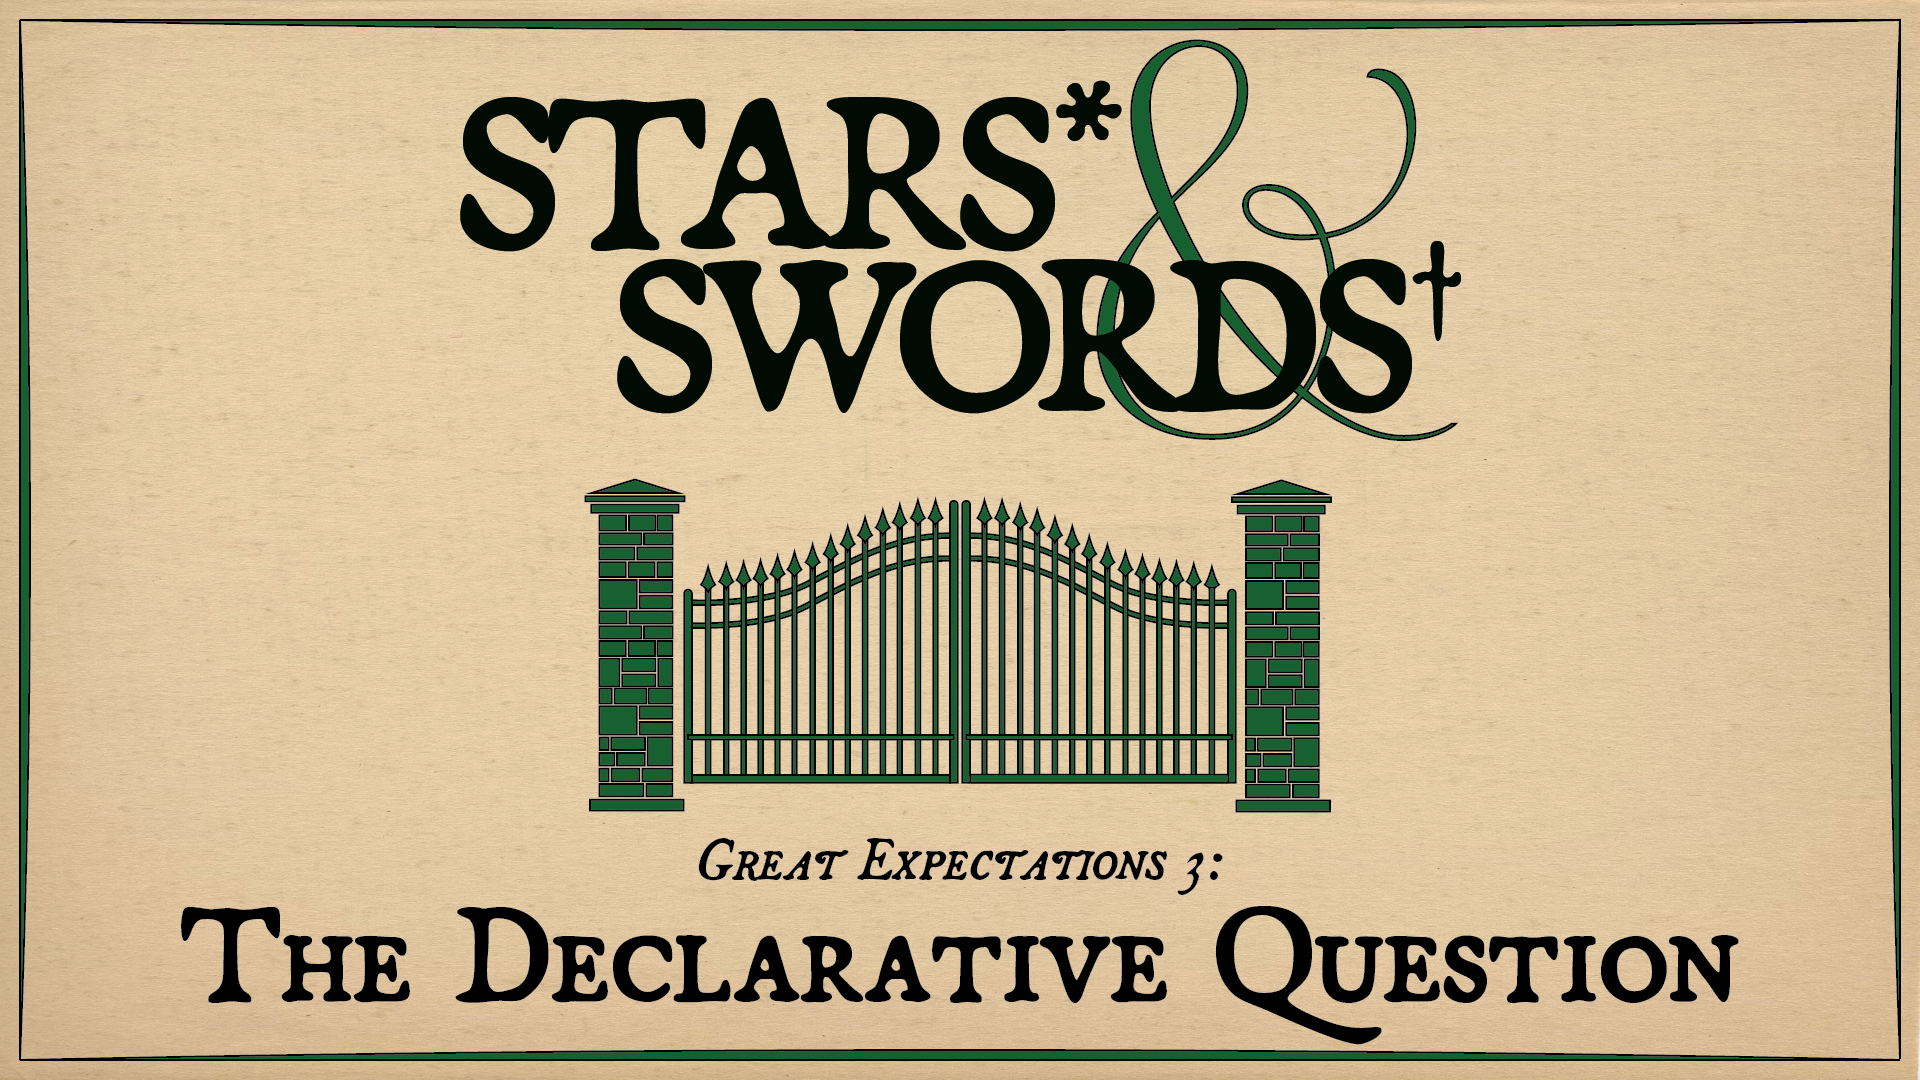 Great Expectations 3: The Declarative Question